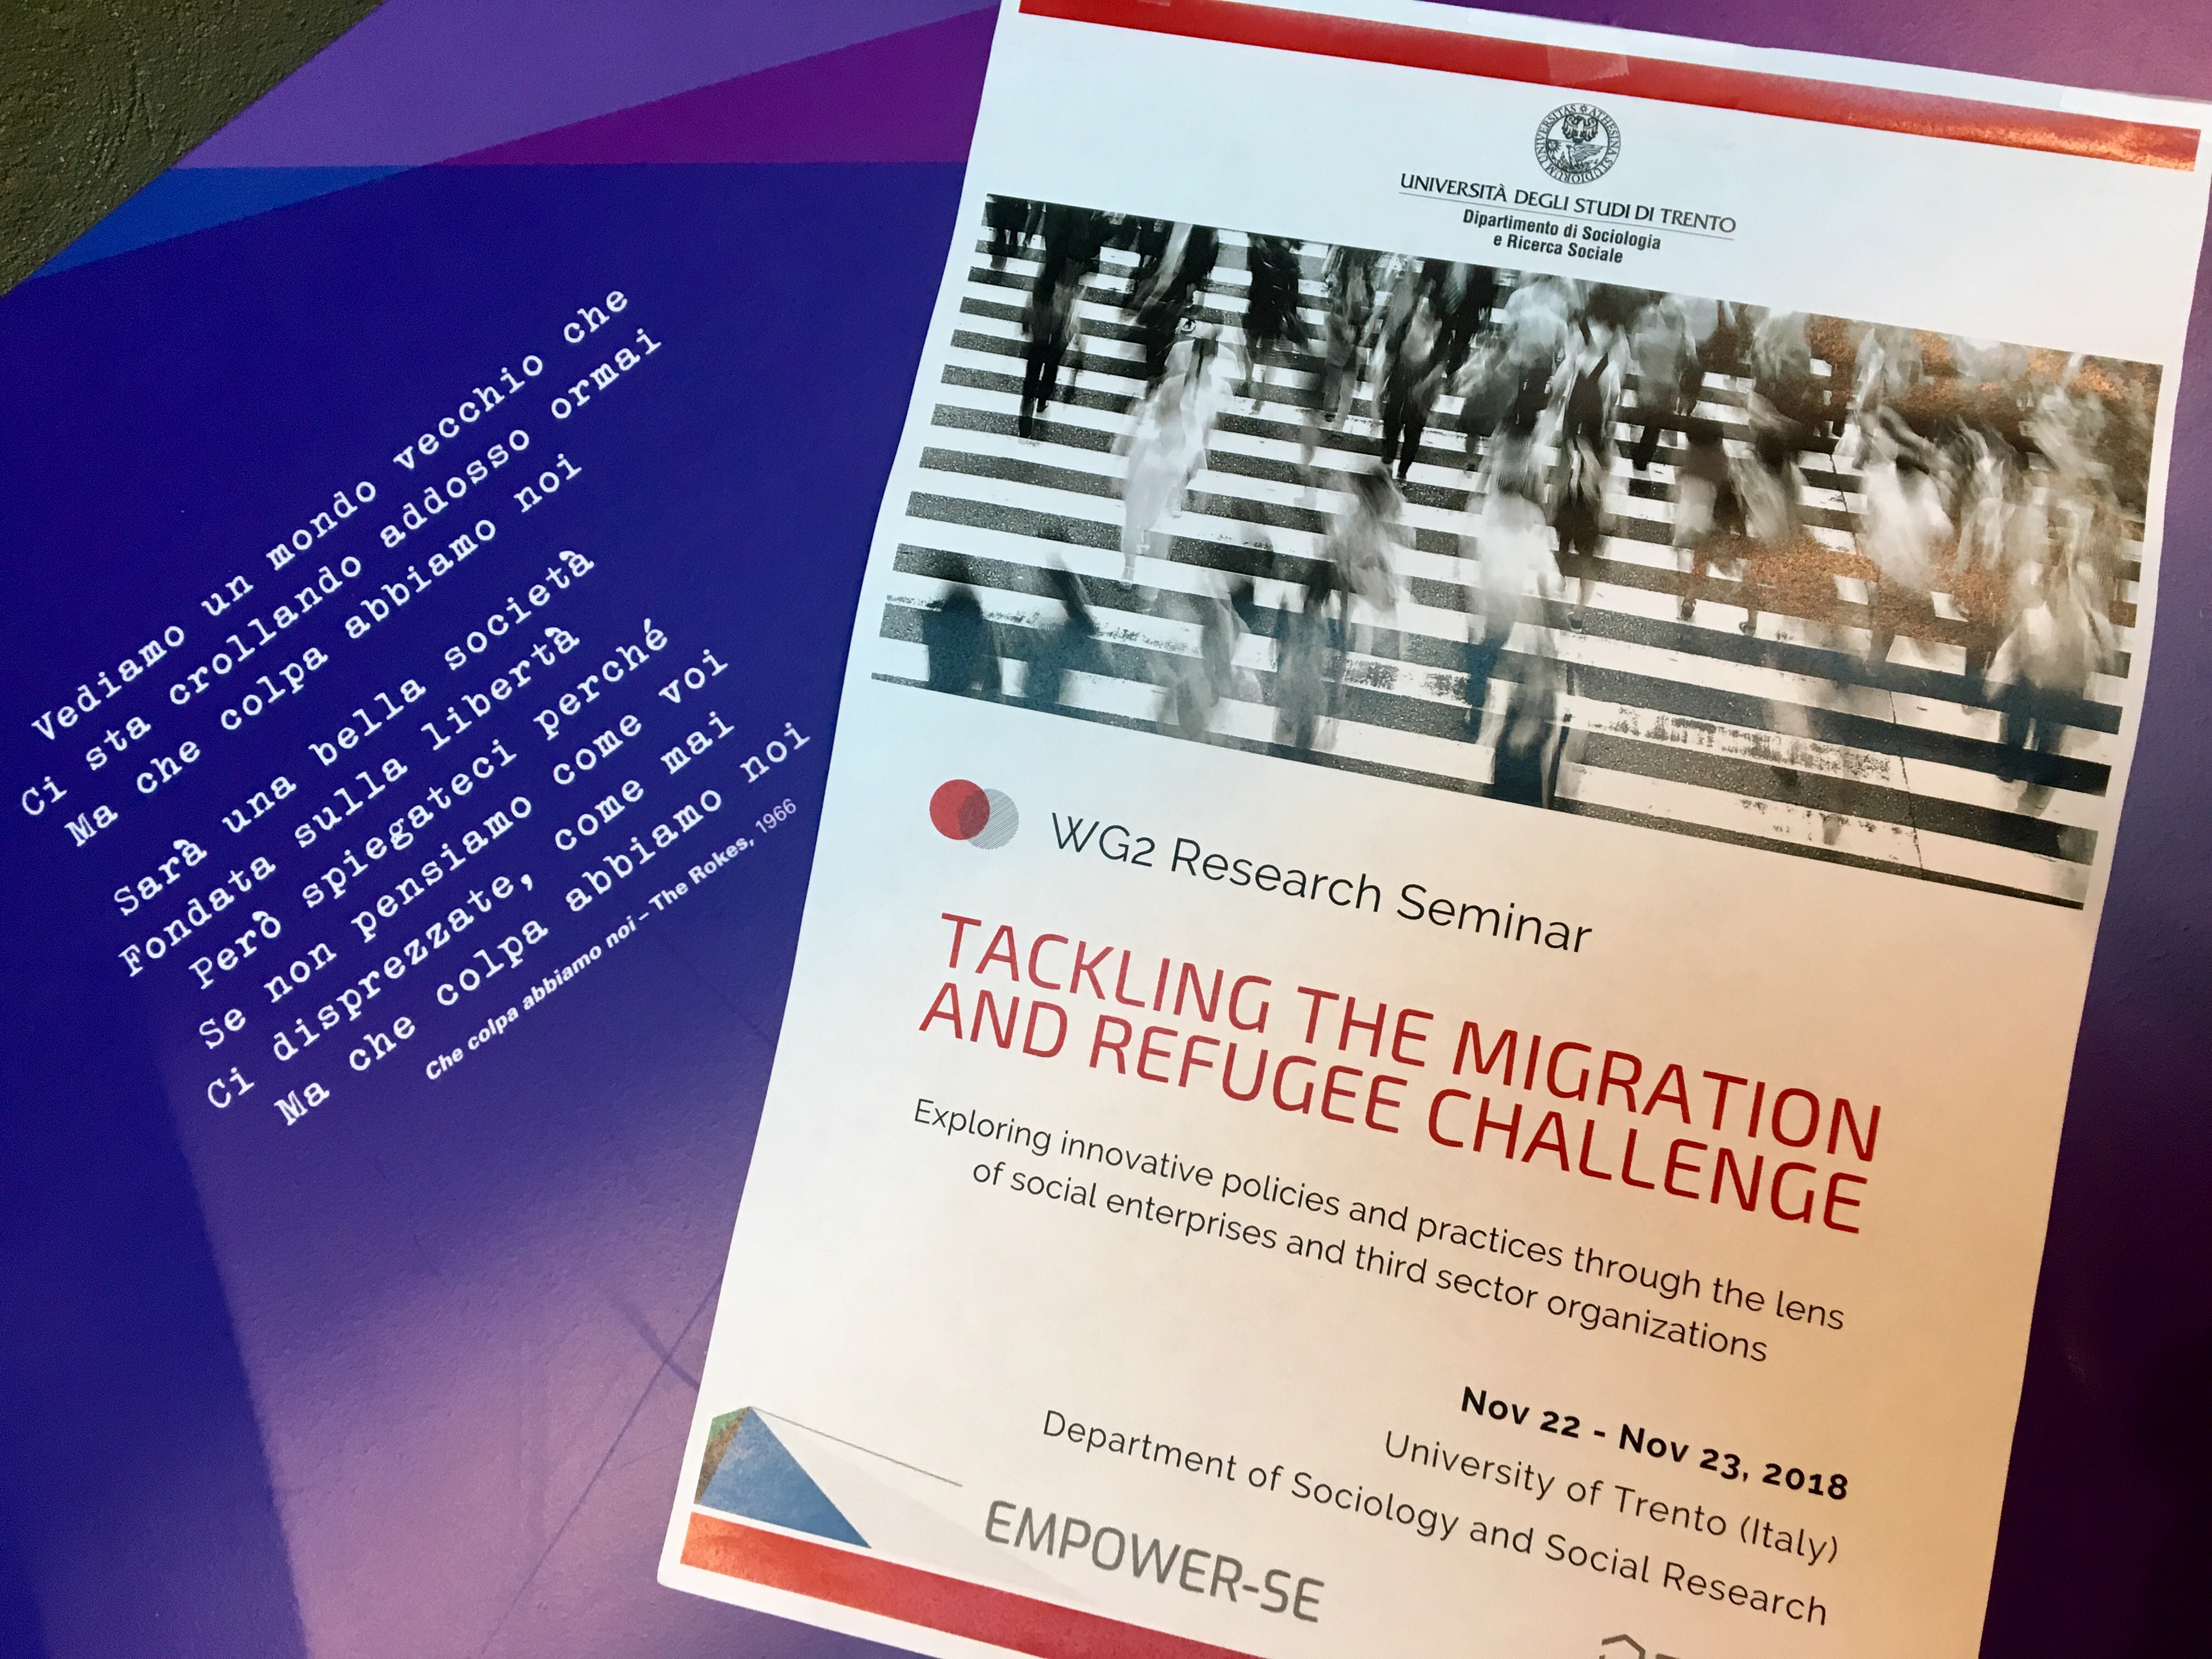 Sharing practices and approaches to tackle the migration and refugee challenge in Europe